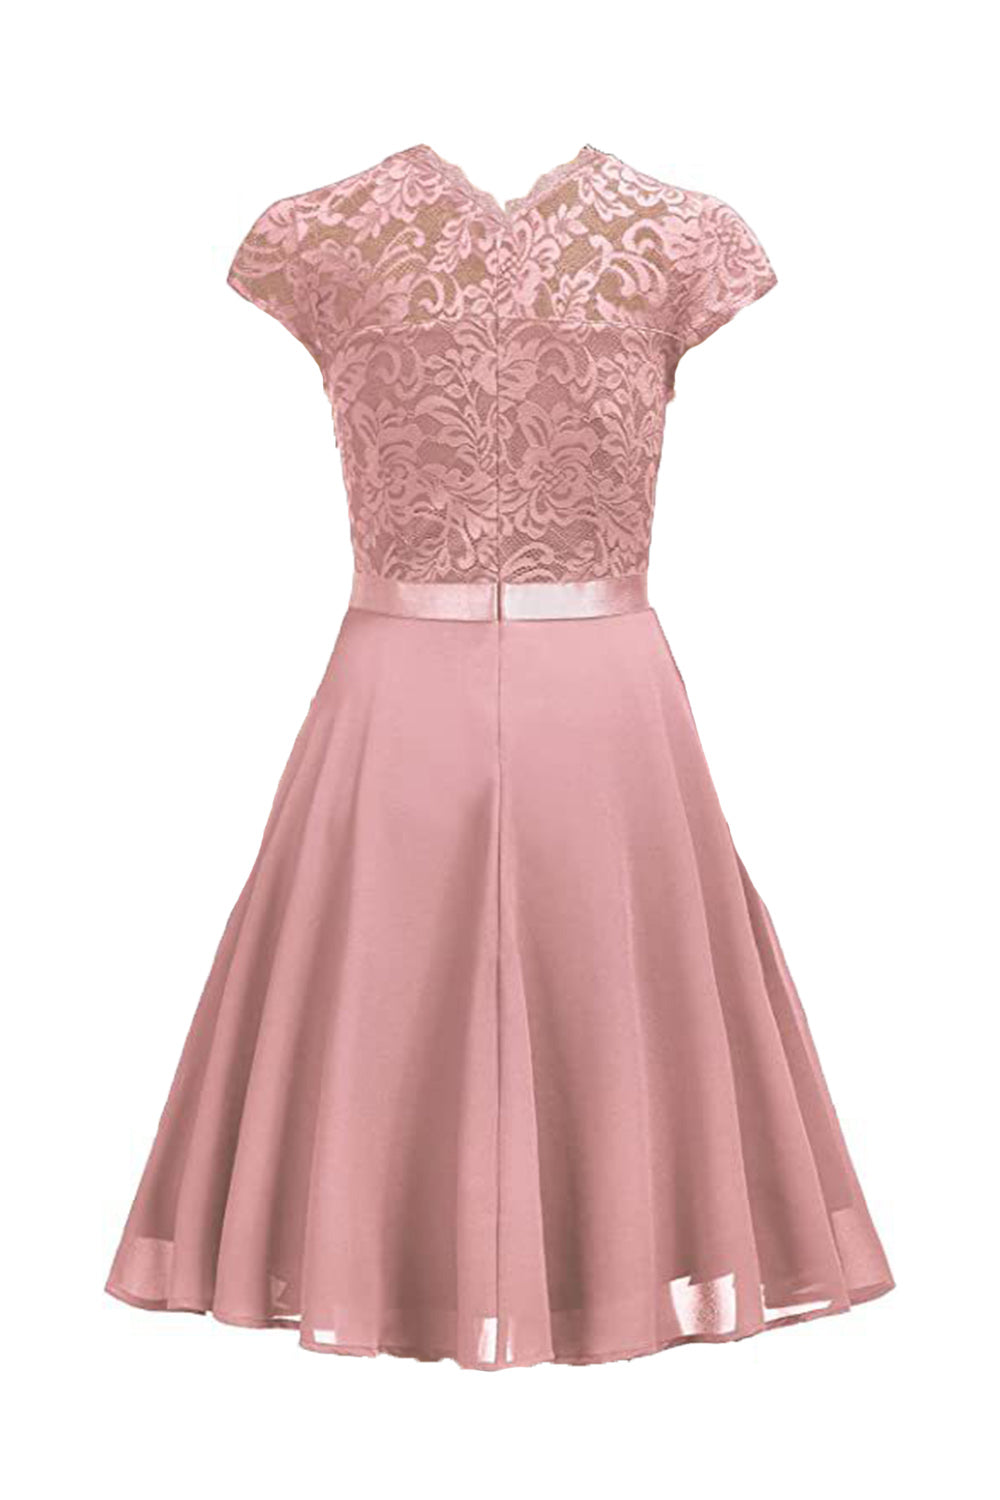 Pink A Line Lace Dress with Ruffles